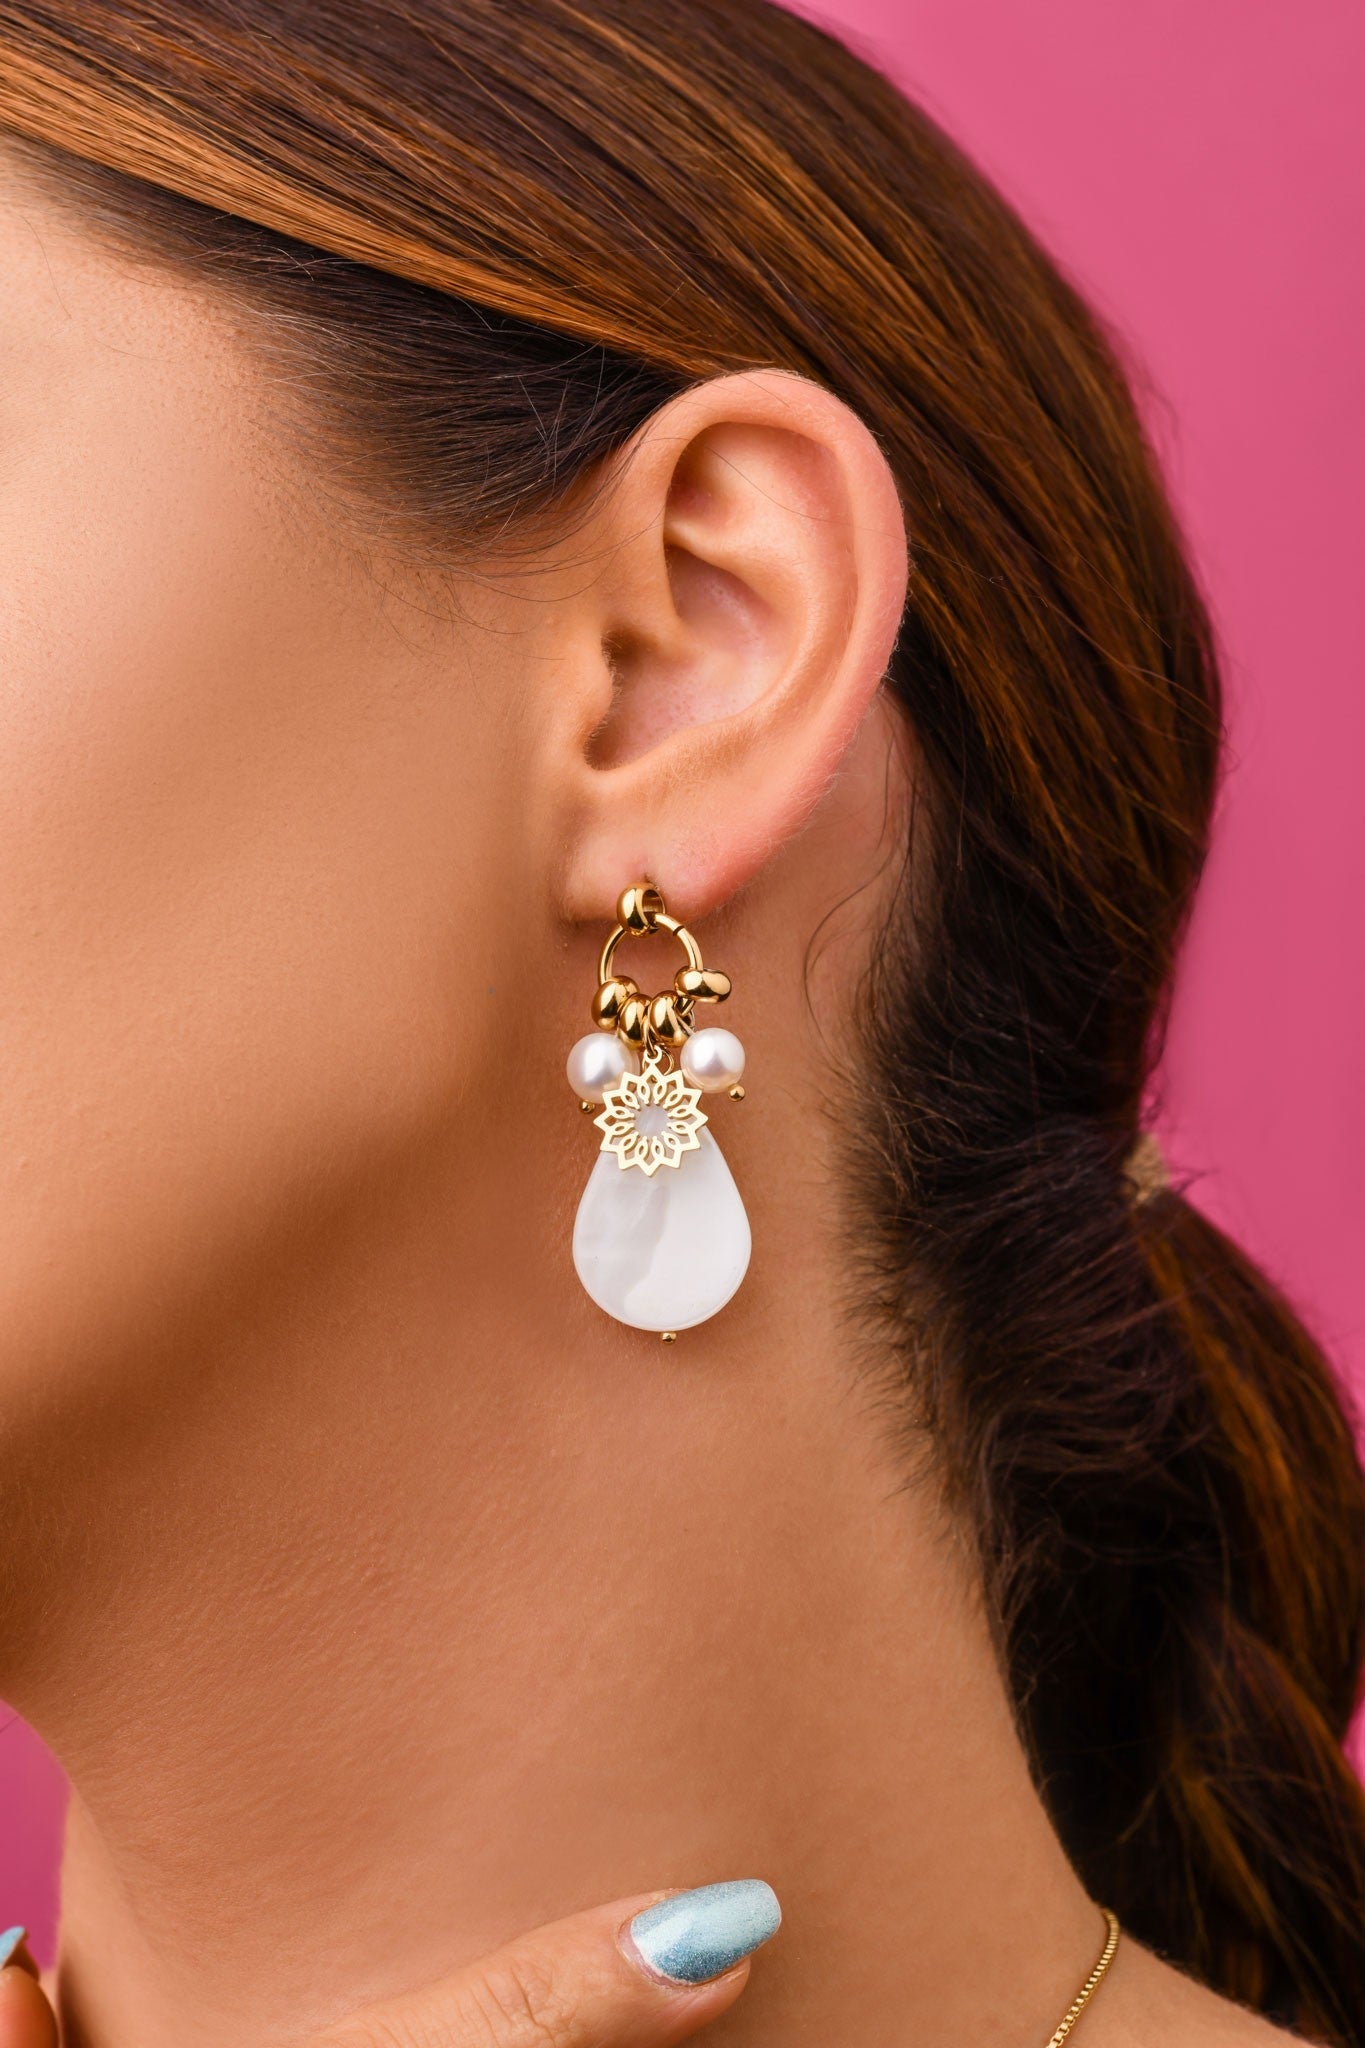 Gold Plated Earrings with Pearl and Flower Pendant